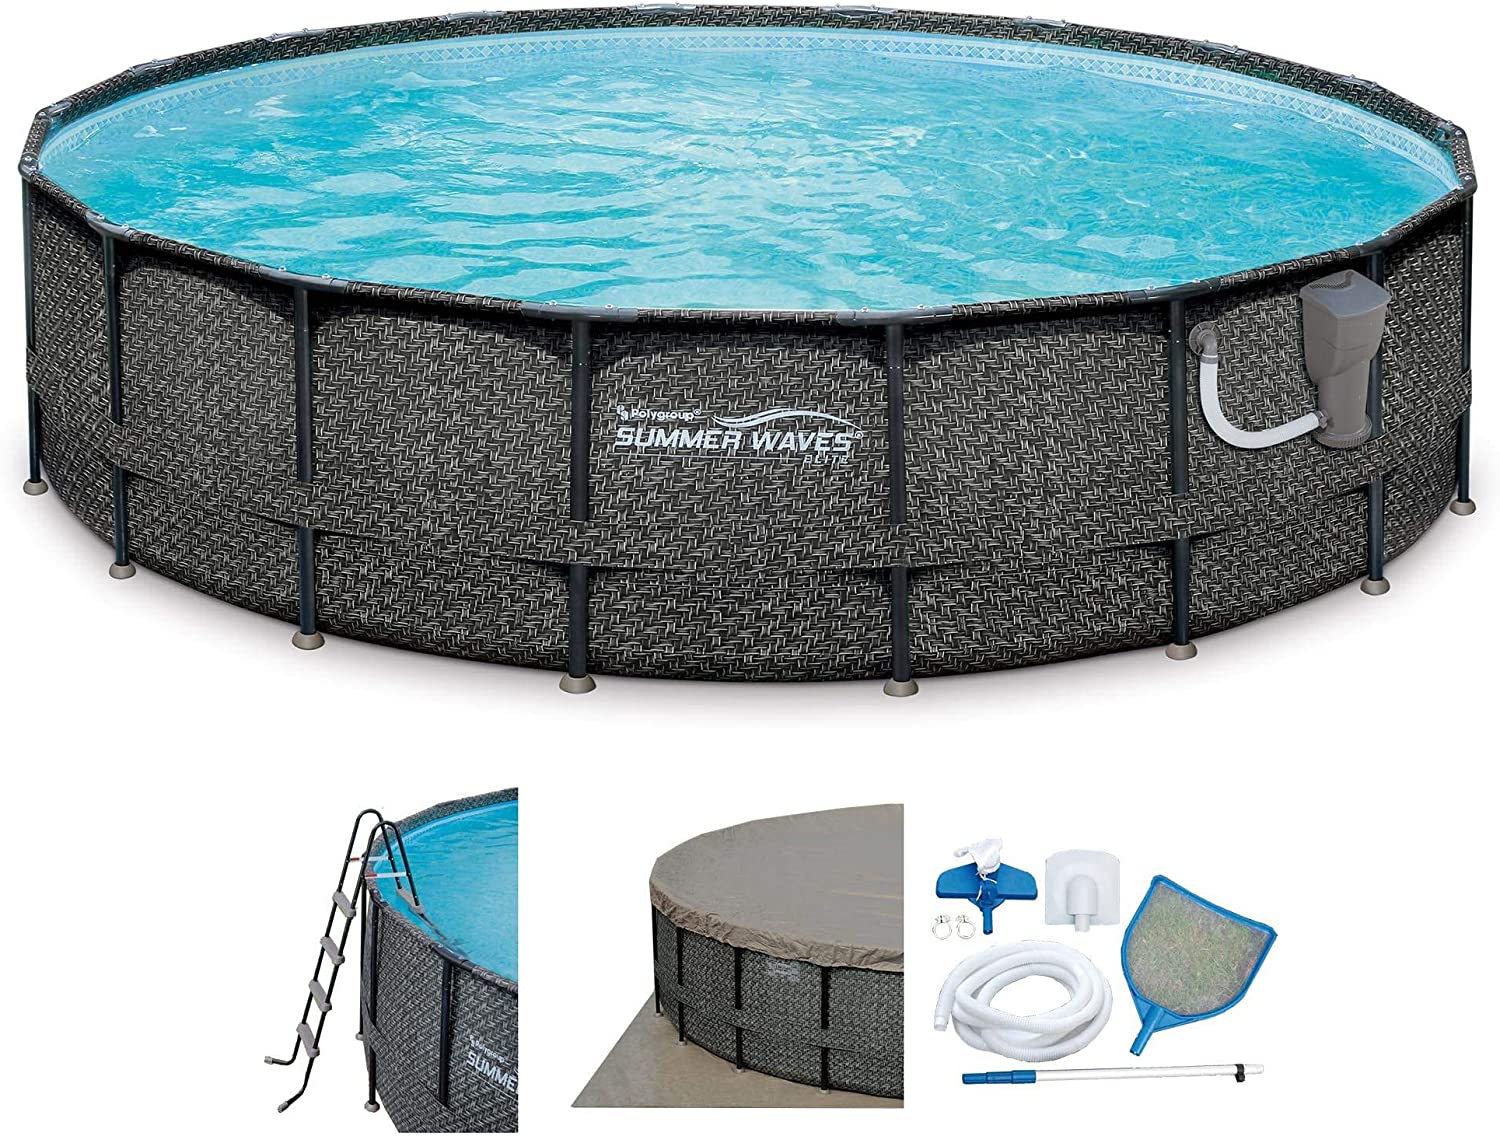 Summer Waves Elite Above Ground Swimming Pool with Filter Pump